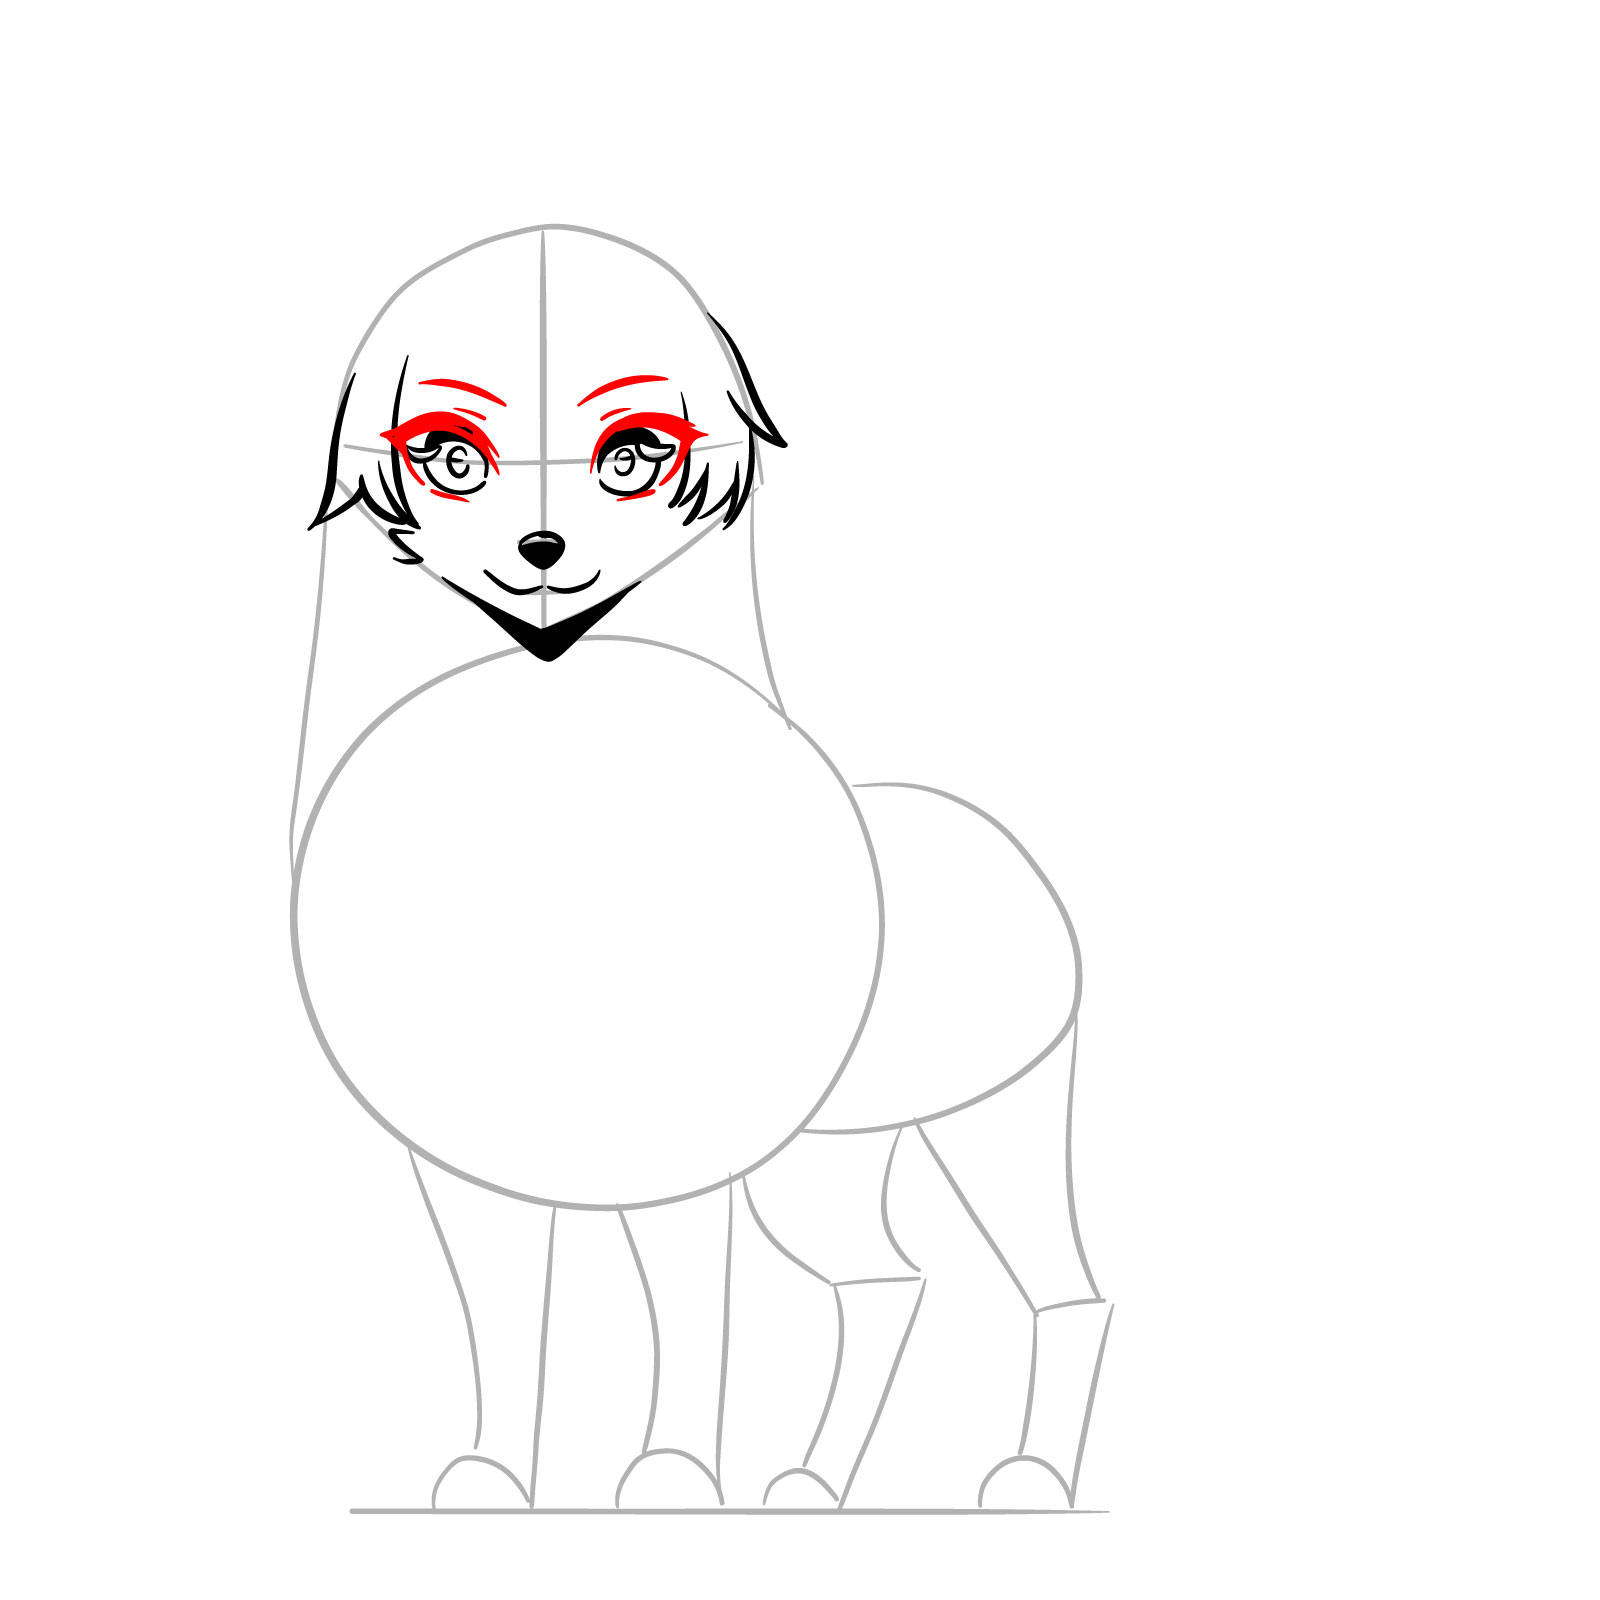 Outlining eyes and adding expressive eyebrows to the anime wolf - step 06